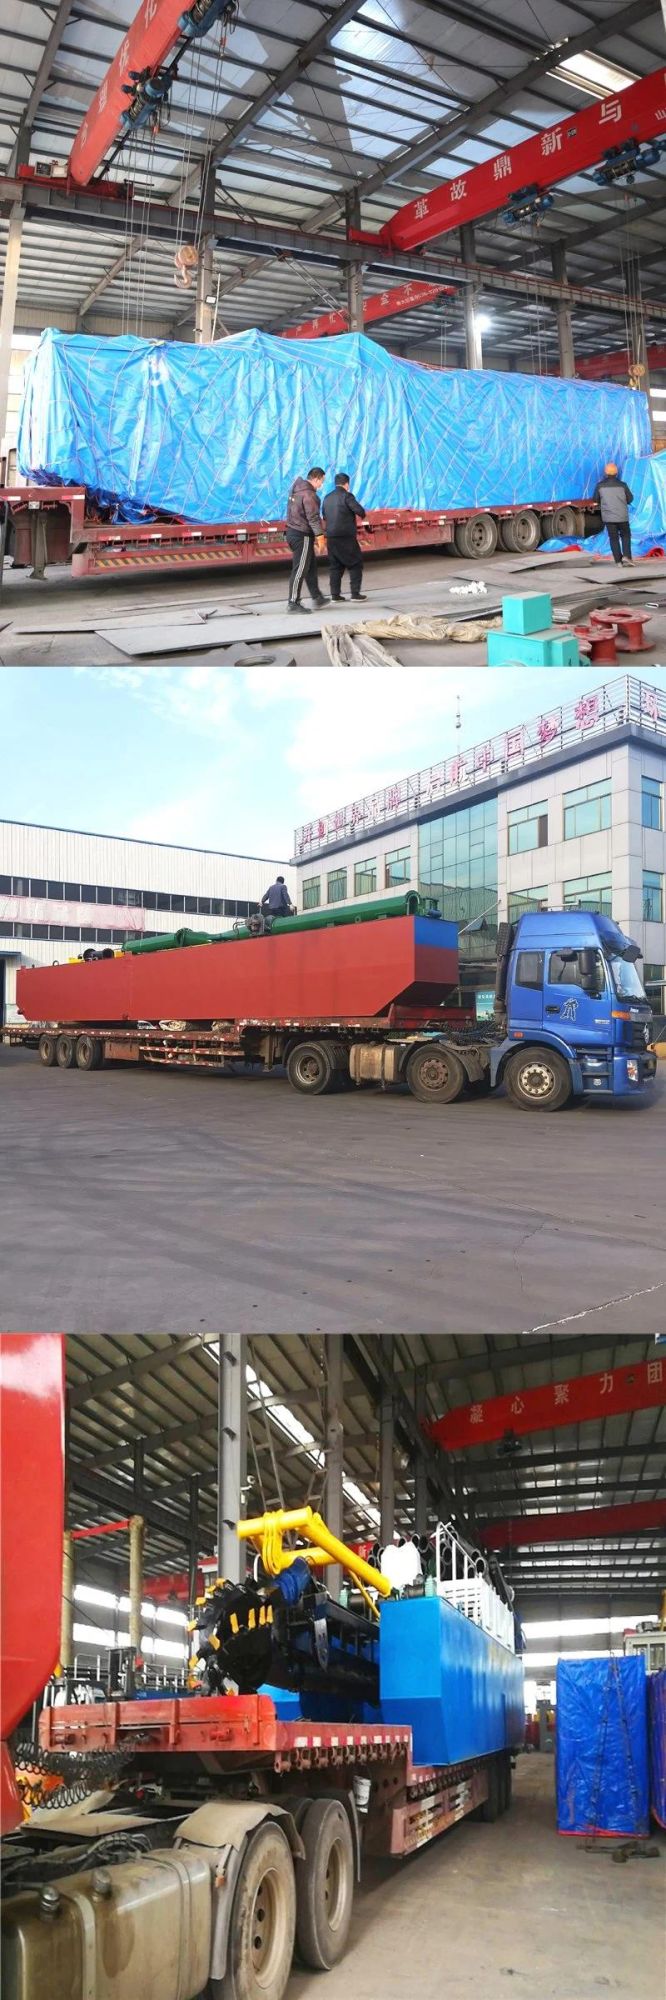 High Quality Shijiazhuang Cutter Suction Sand Dredger Used in River